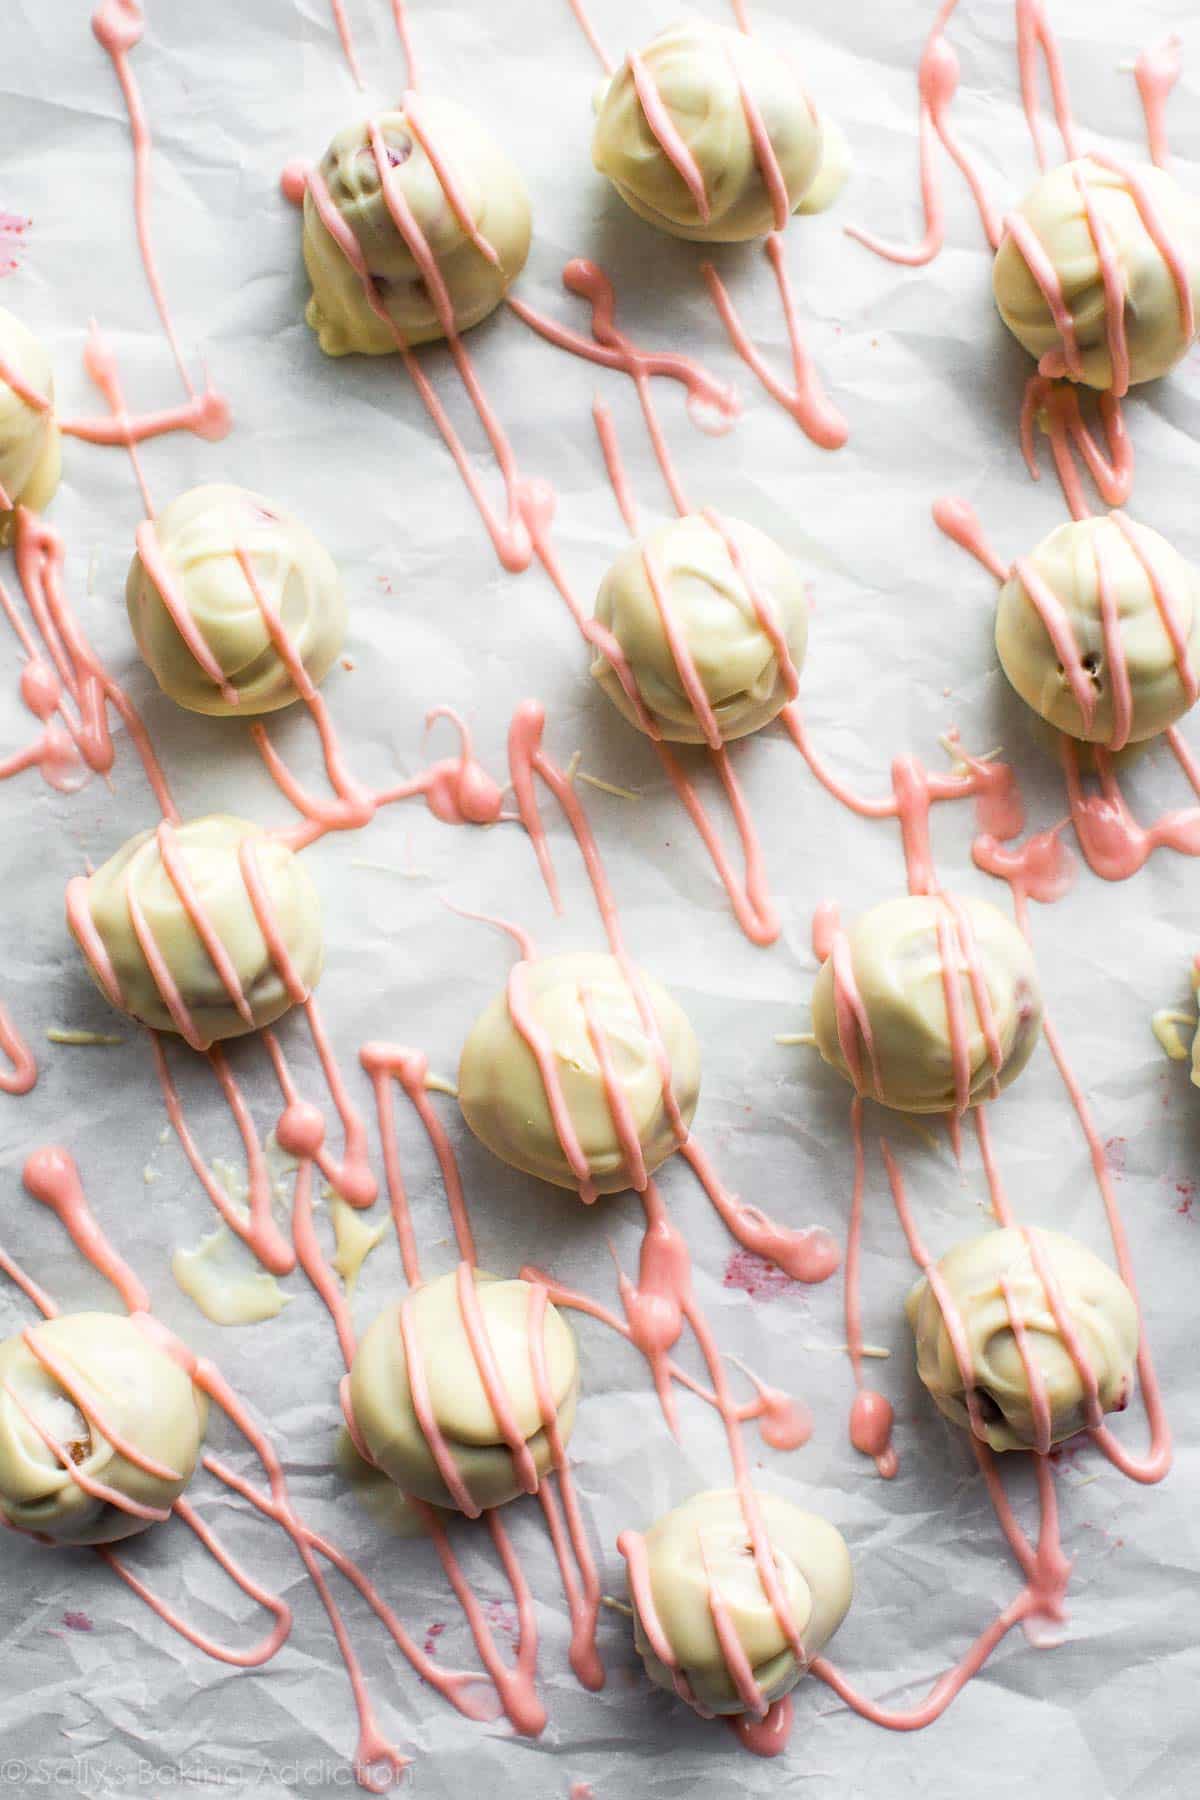 strawberry cheesecake truffles coated in white chocolate with a pink white chocolate drizzle on parchment paper